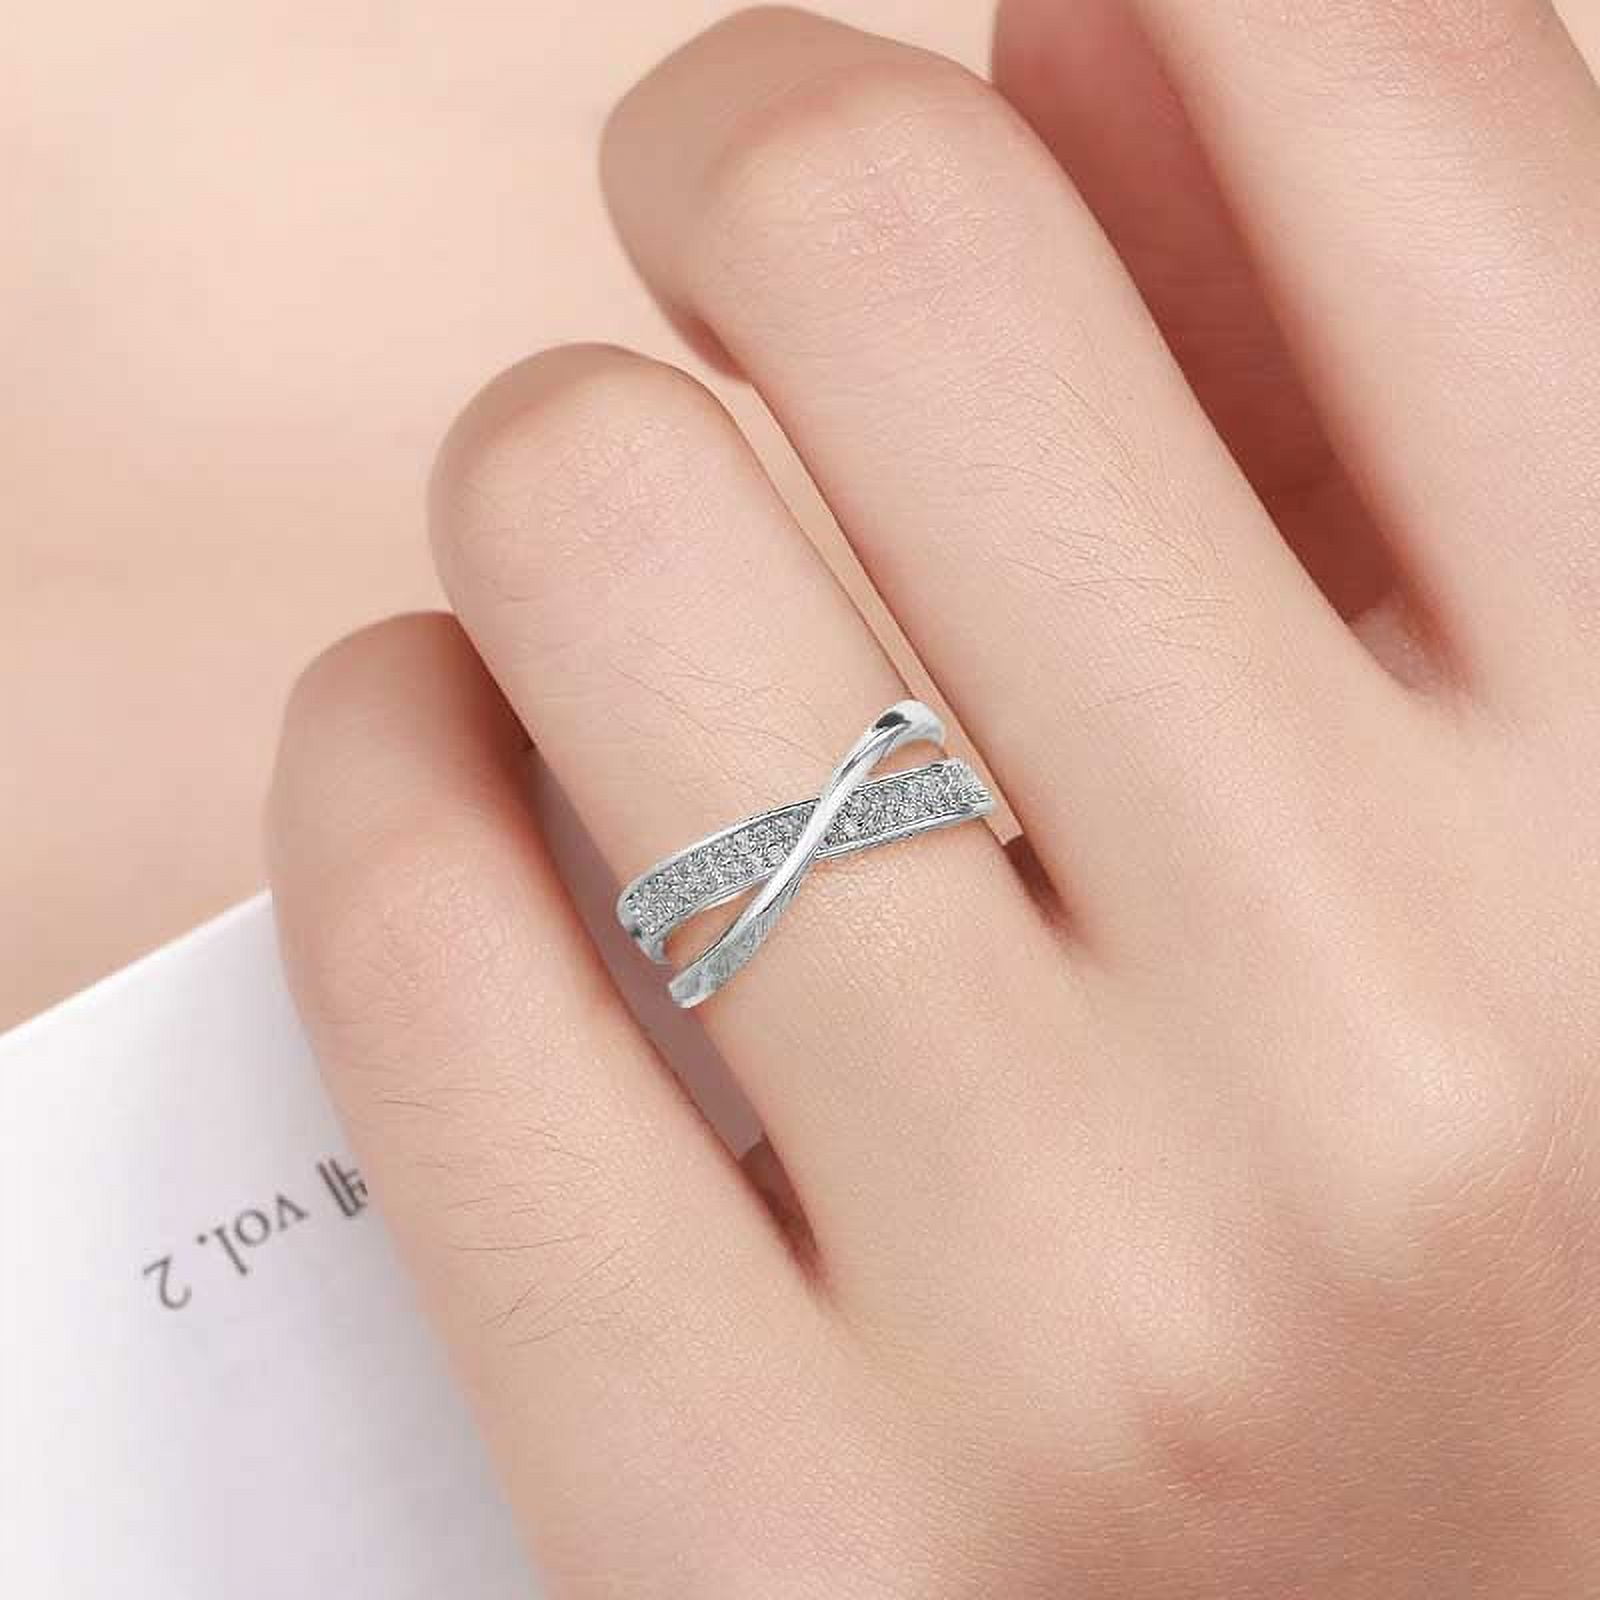 VIME Designer X Shaped Diamond Twisted Ring Band S925 Sterling Silver,  Wide, Narrow, Fashionable And Elegant From Black8, $29.93 | DHgate.Com